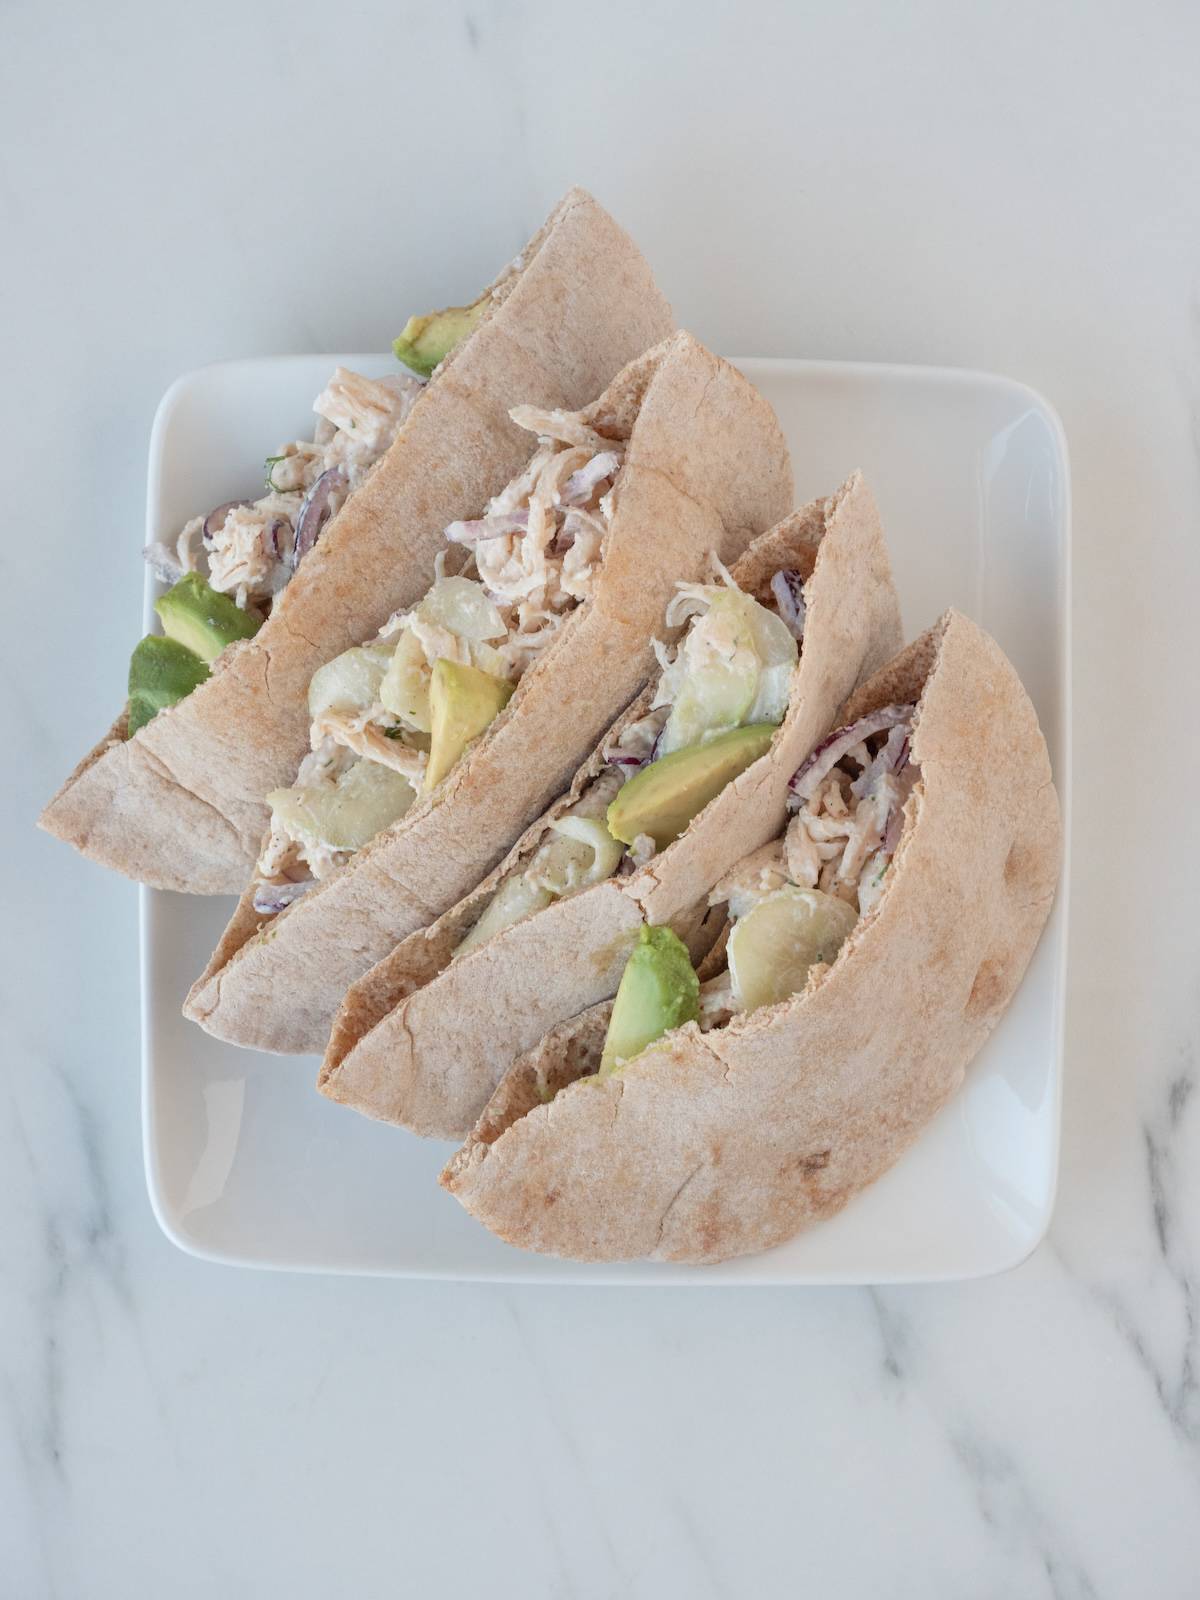 A square white plate, with four halves of stuffed pitas, stuffed with shredded chicken tossed in tzatziki, sliced red onions and sliced avocados.